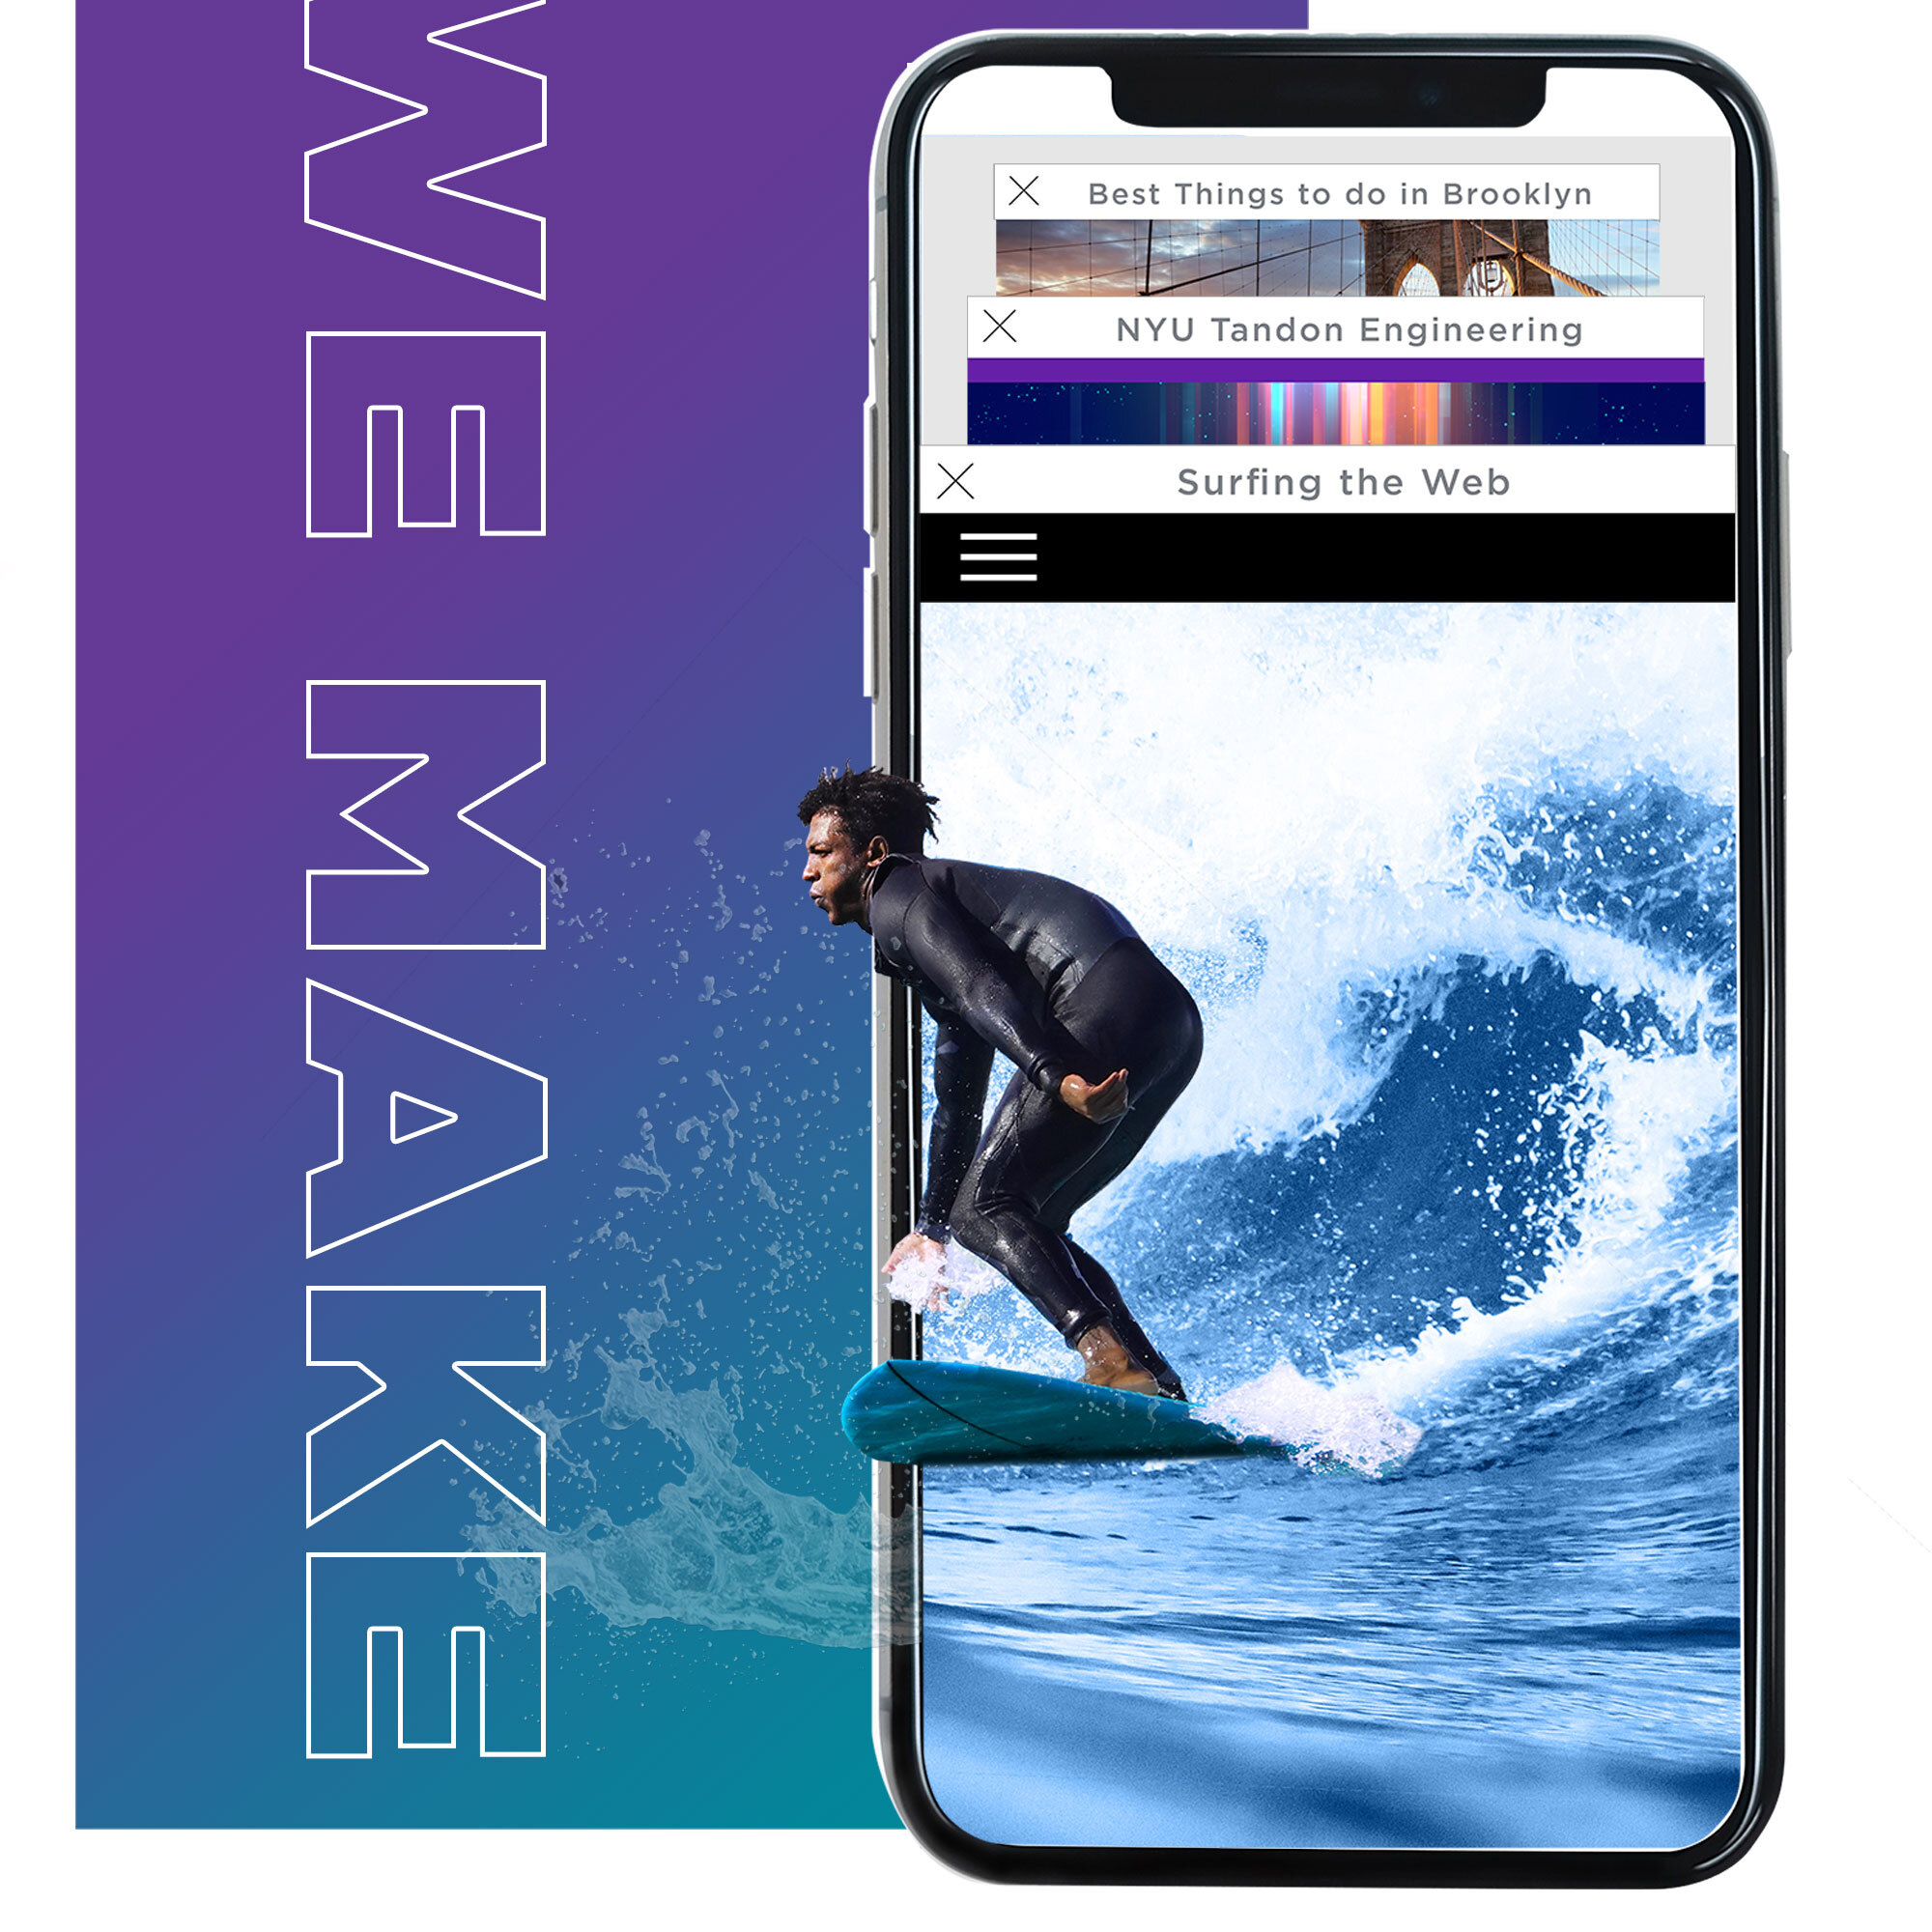 Surfer riding a wave next to a superimposed cell phone.